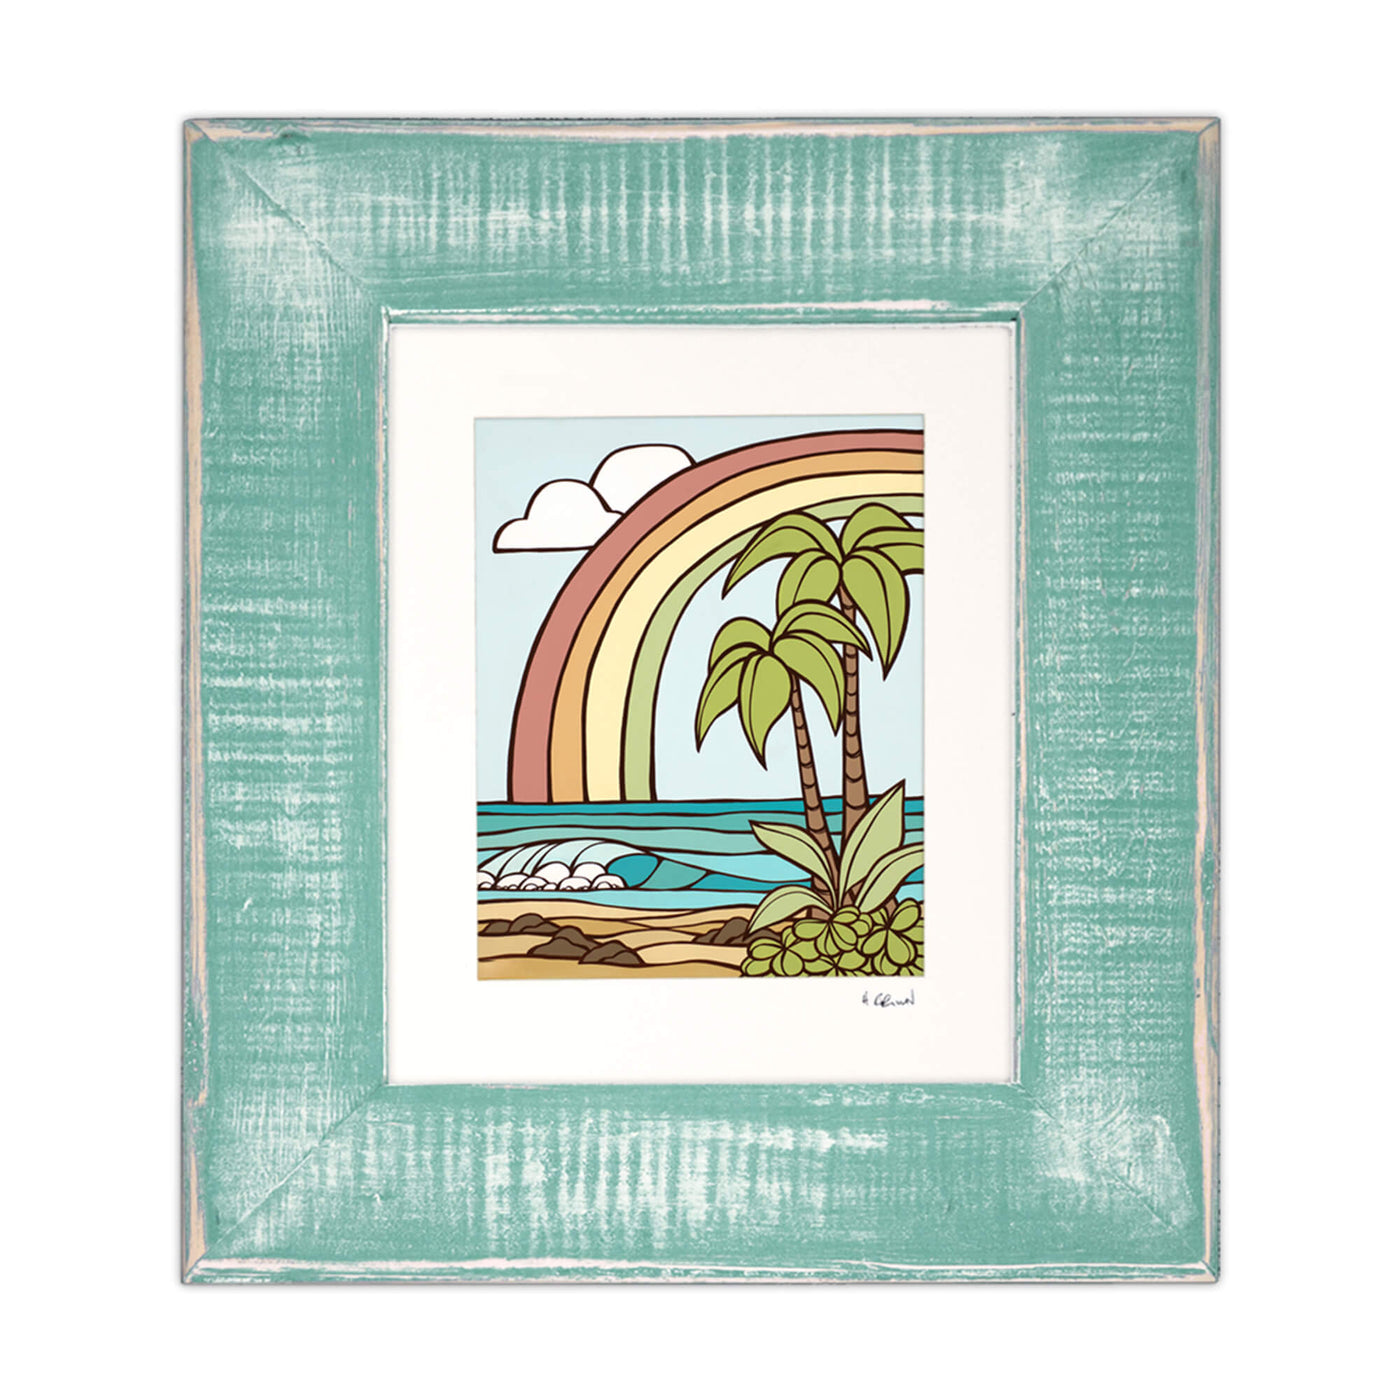 A matted art print in seafoam frame featuring a seascape with rainbow and teal colored ocean by Hawaii surf artist Heather Brown